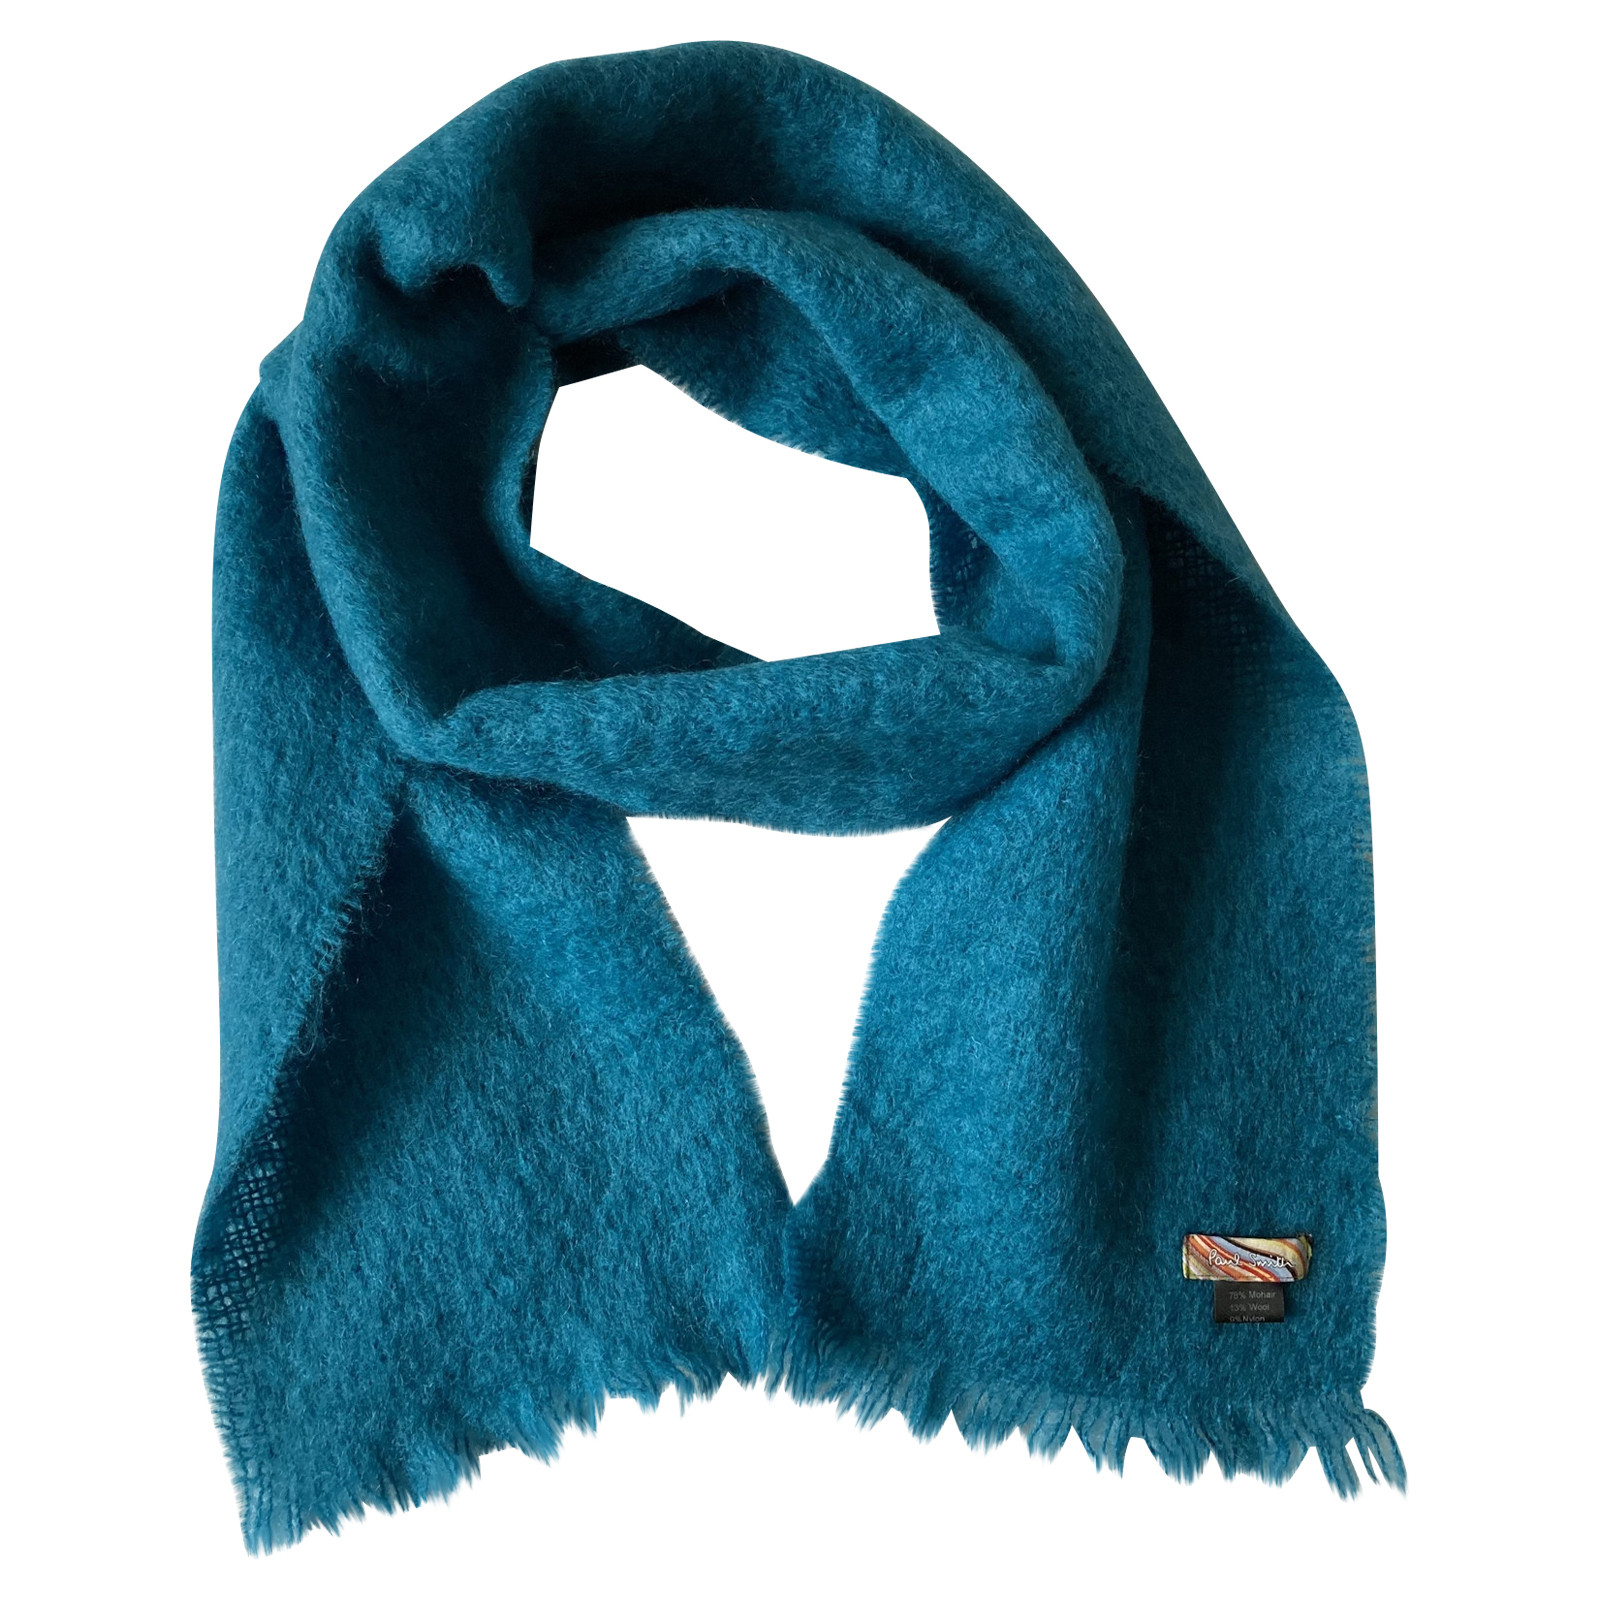 PAUL SMITH Women's Scarf/Shawl in Turquoise | Second Hand